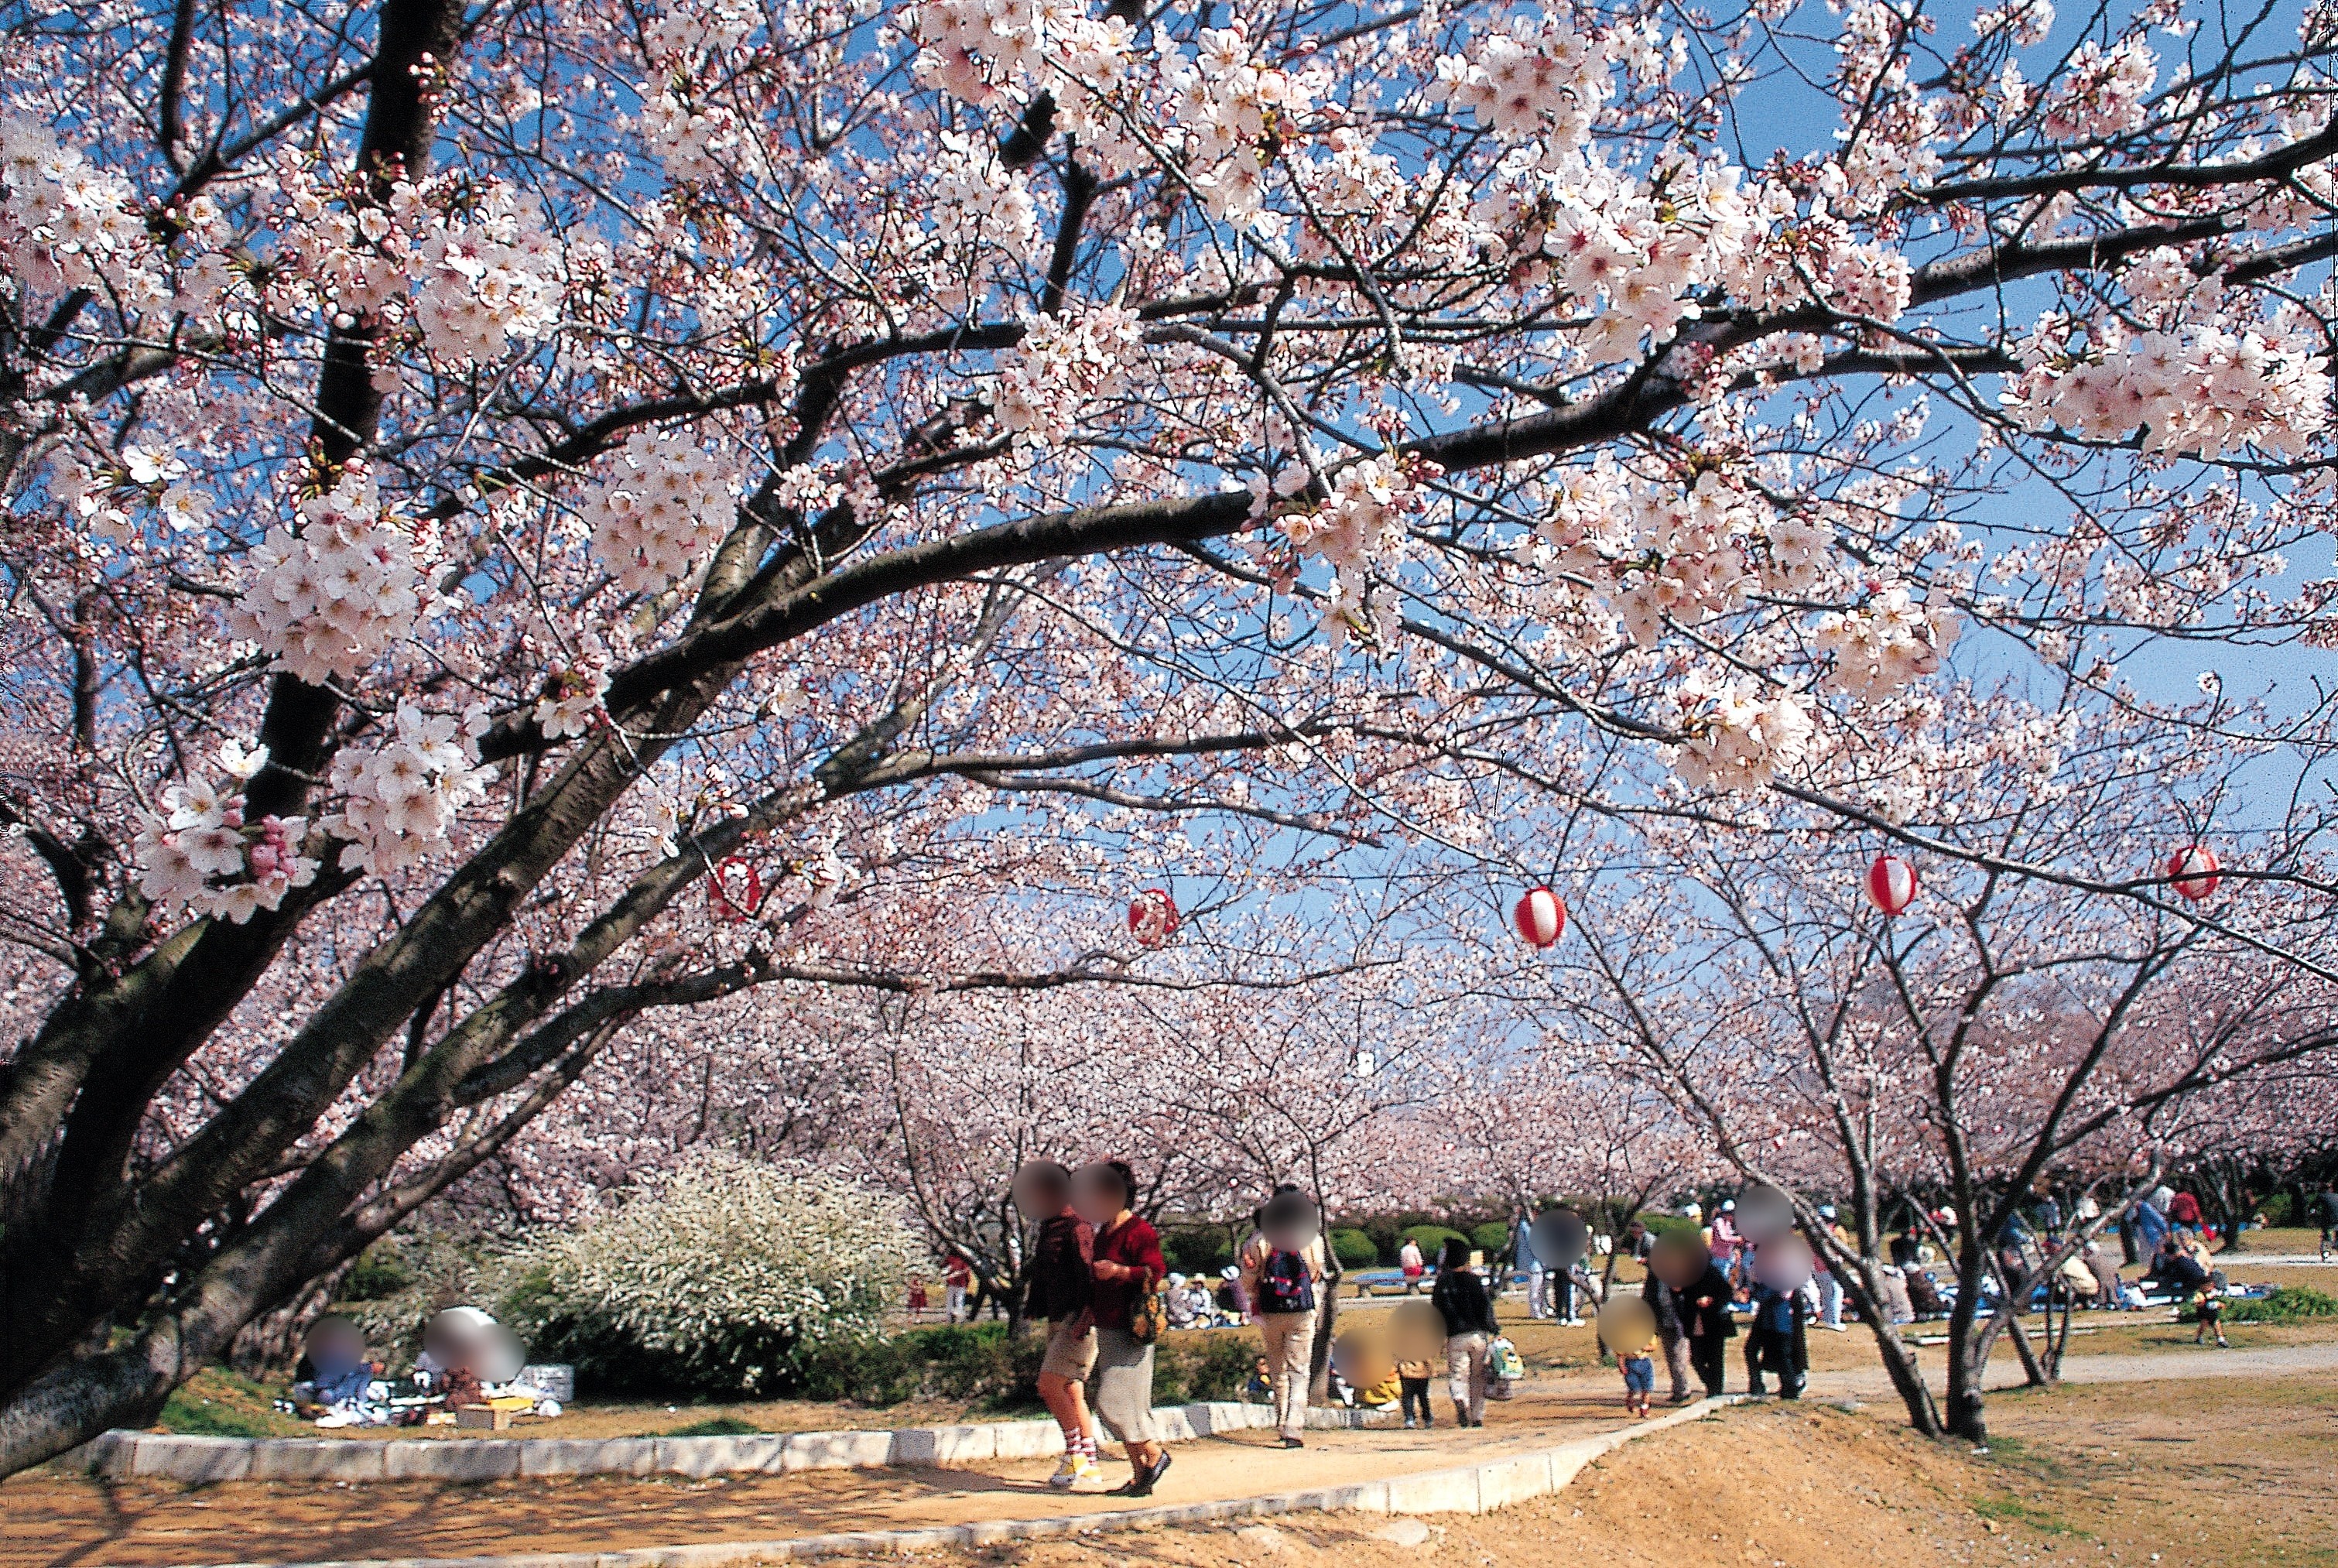 A famous place for cherry blossom viewing? Of course there is